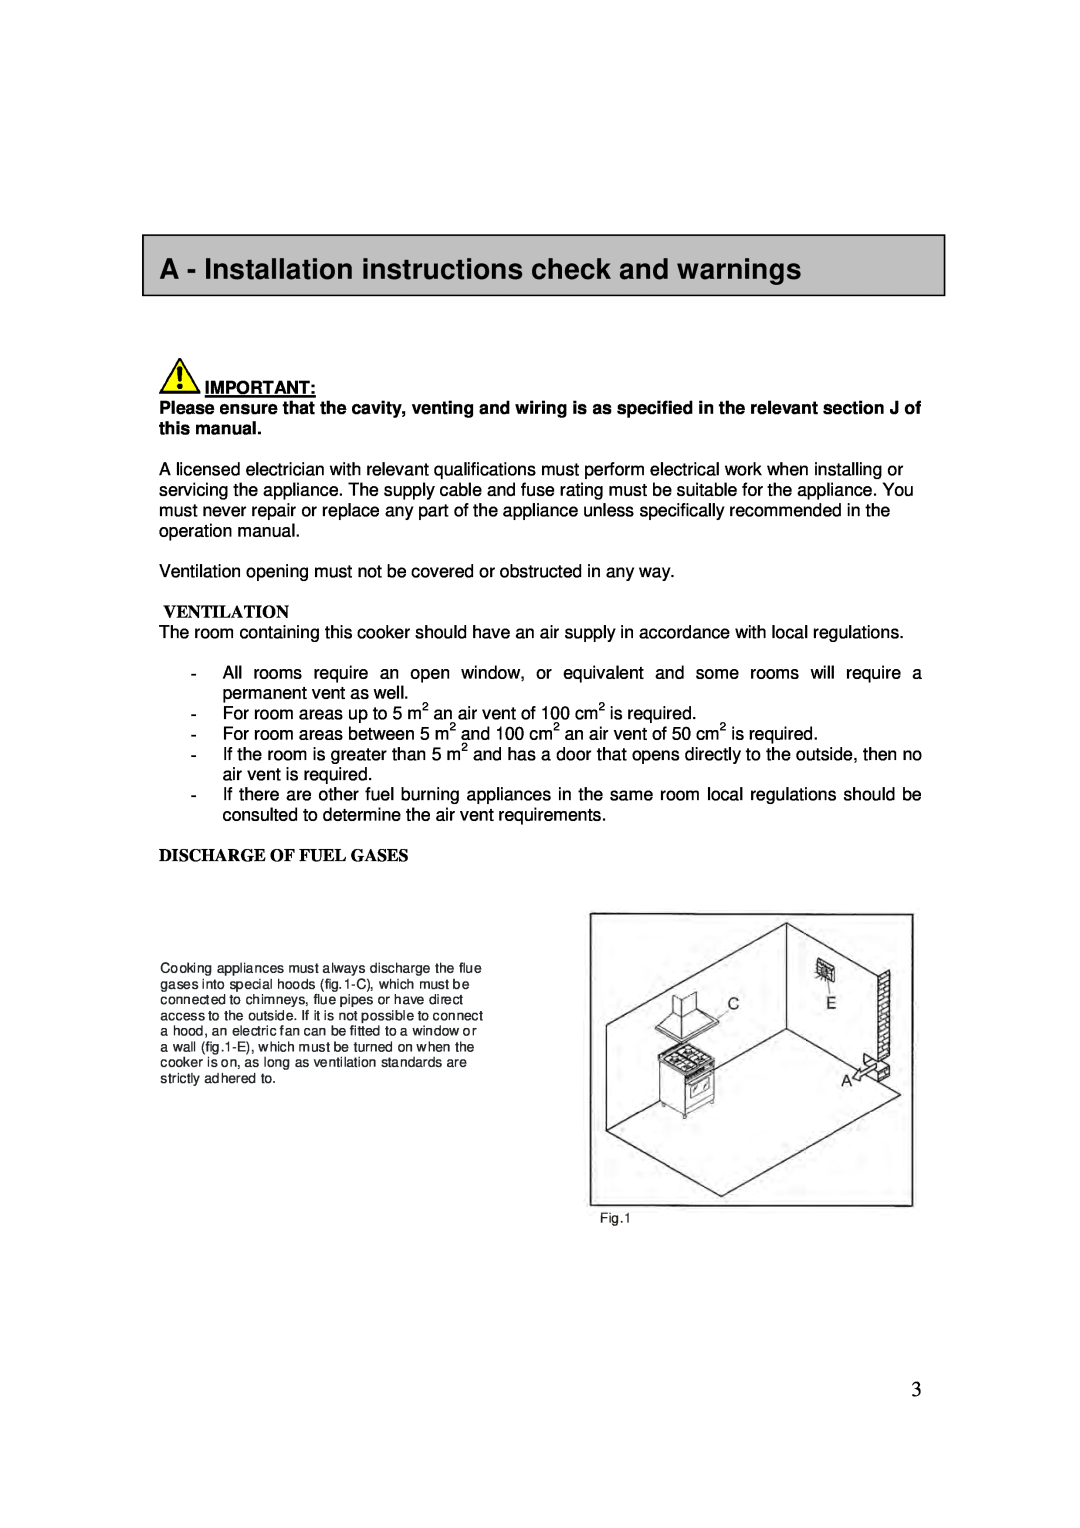 AEG 3009VNM-M, 3009VNMM user manual A - Installation instructions check and warnings, Ventilation, Discharge Of Fuel Gases 